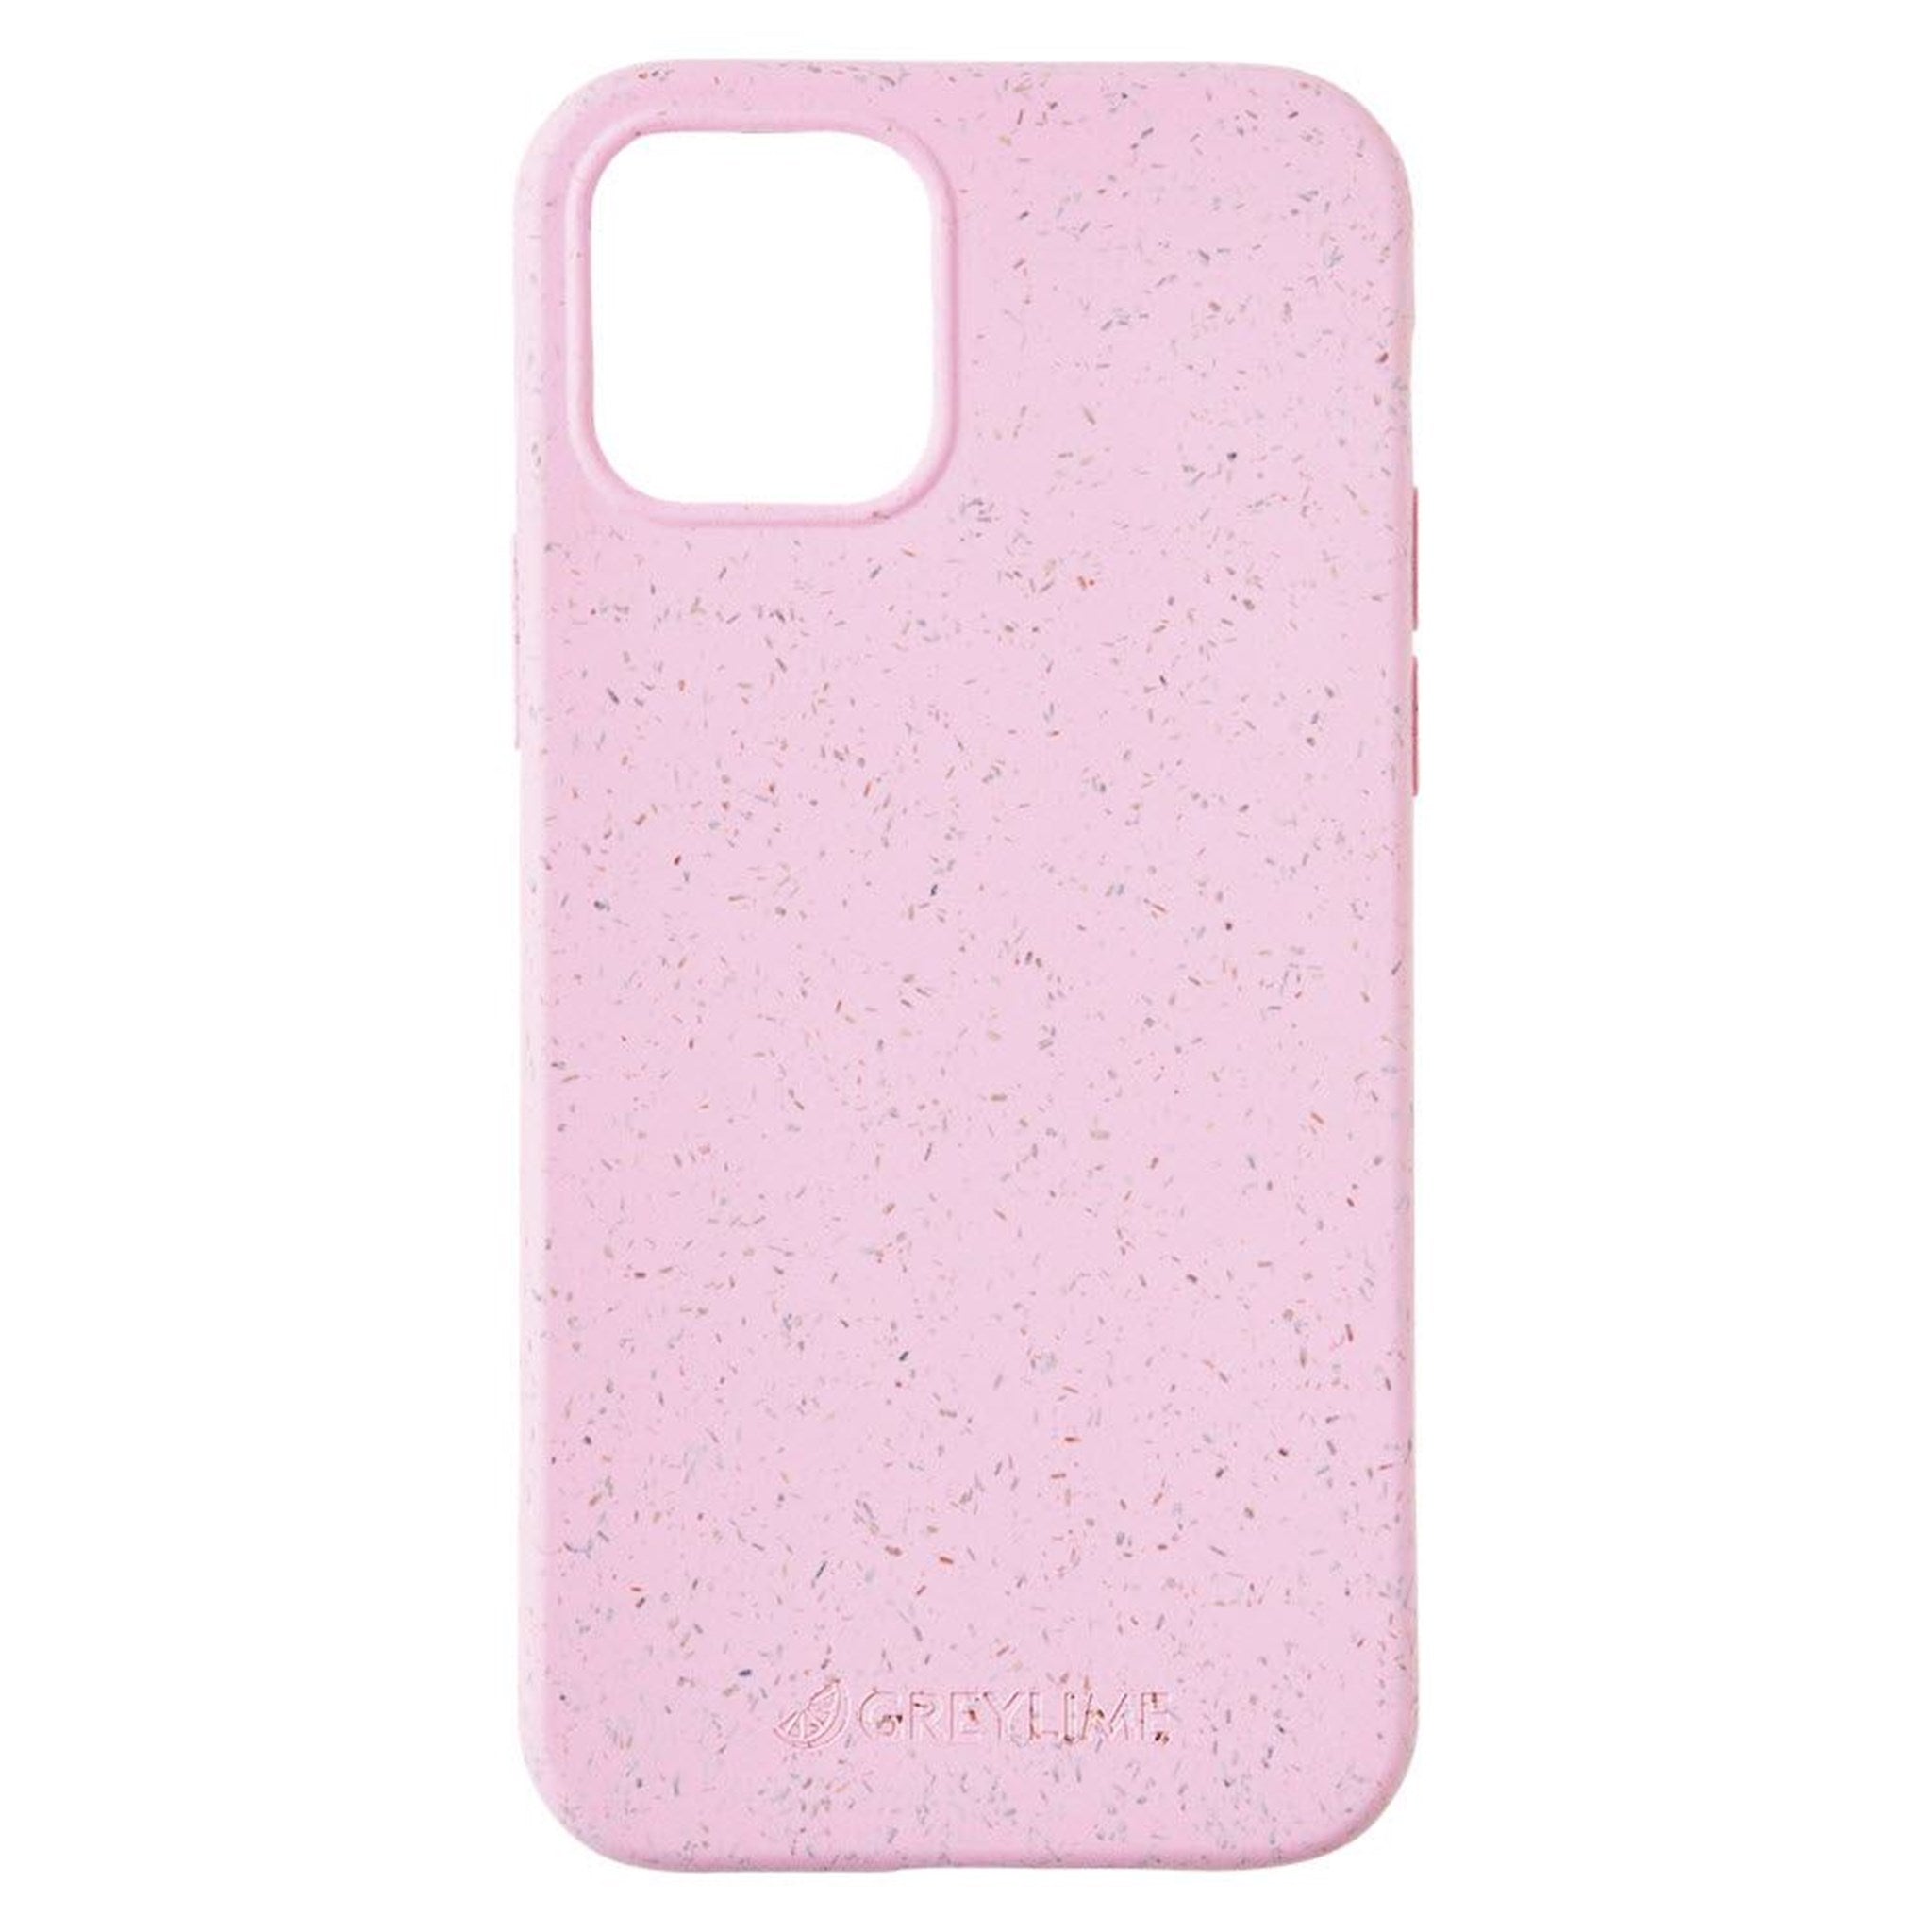 GreyLime-iPhone-12-12-Pro-Biodegdrable-Cover-Pink-COIP12M05-V3.jpg